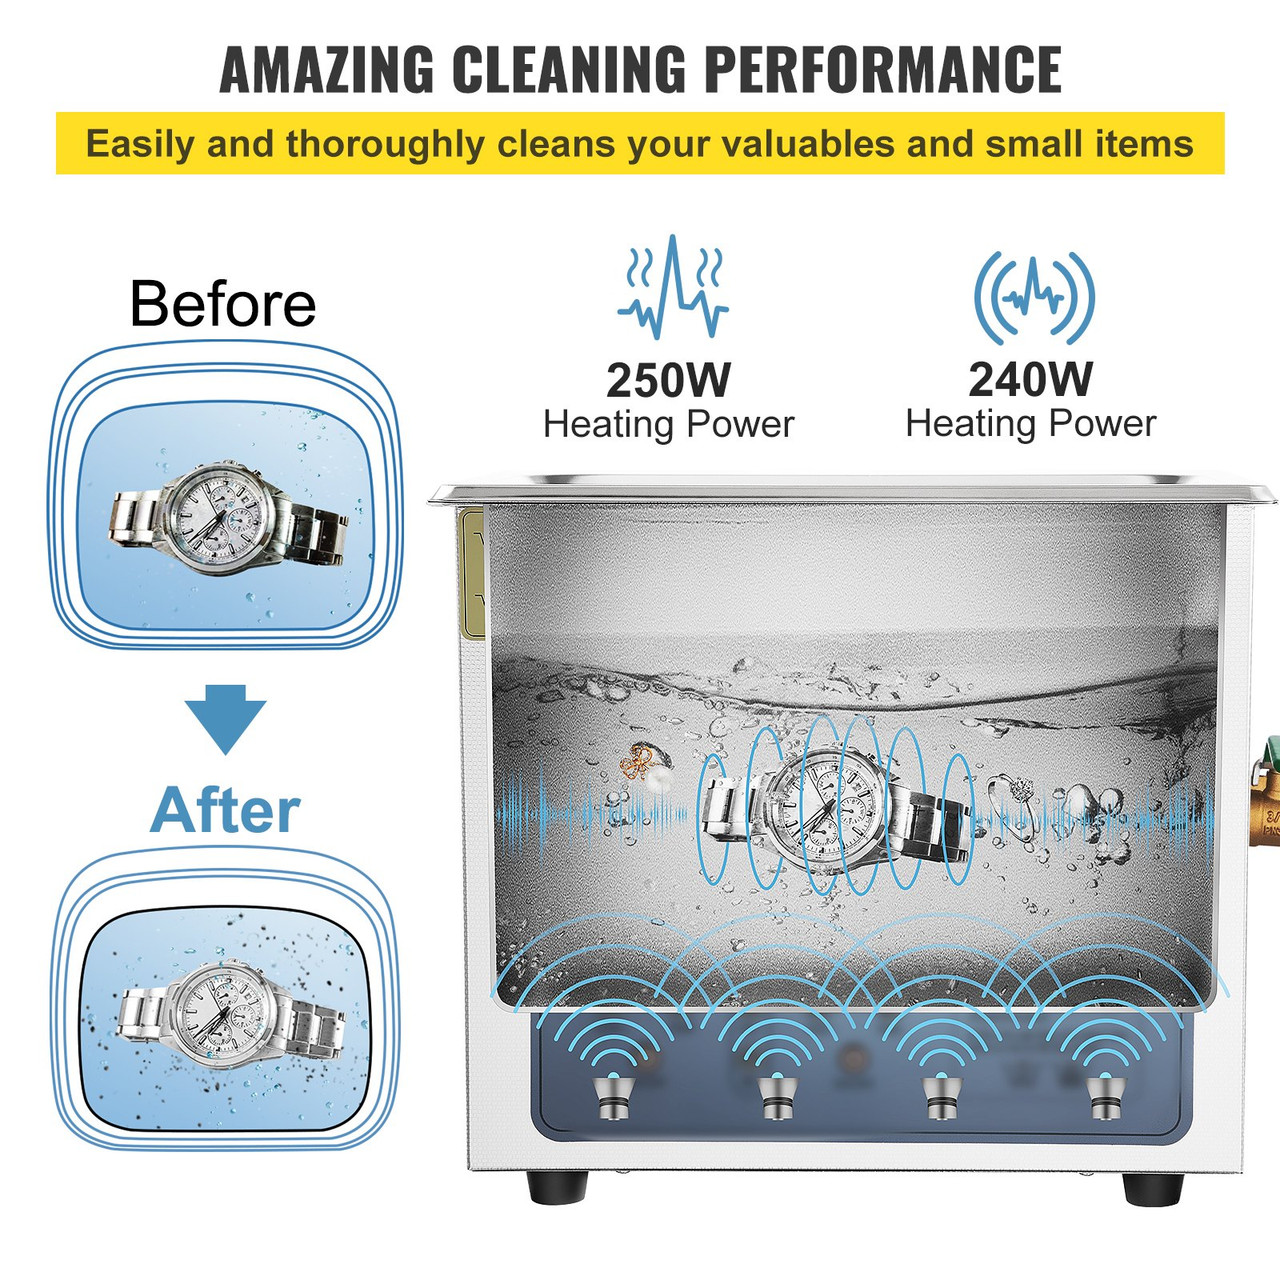 2.6 Gal Ultrasonic Cleaner 240W 40kHz Stainless Steel Bath Lab Washer